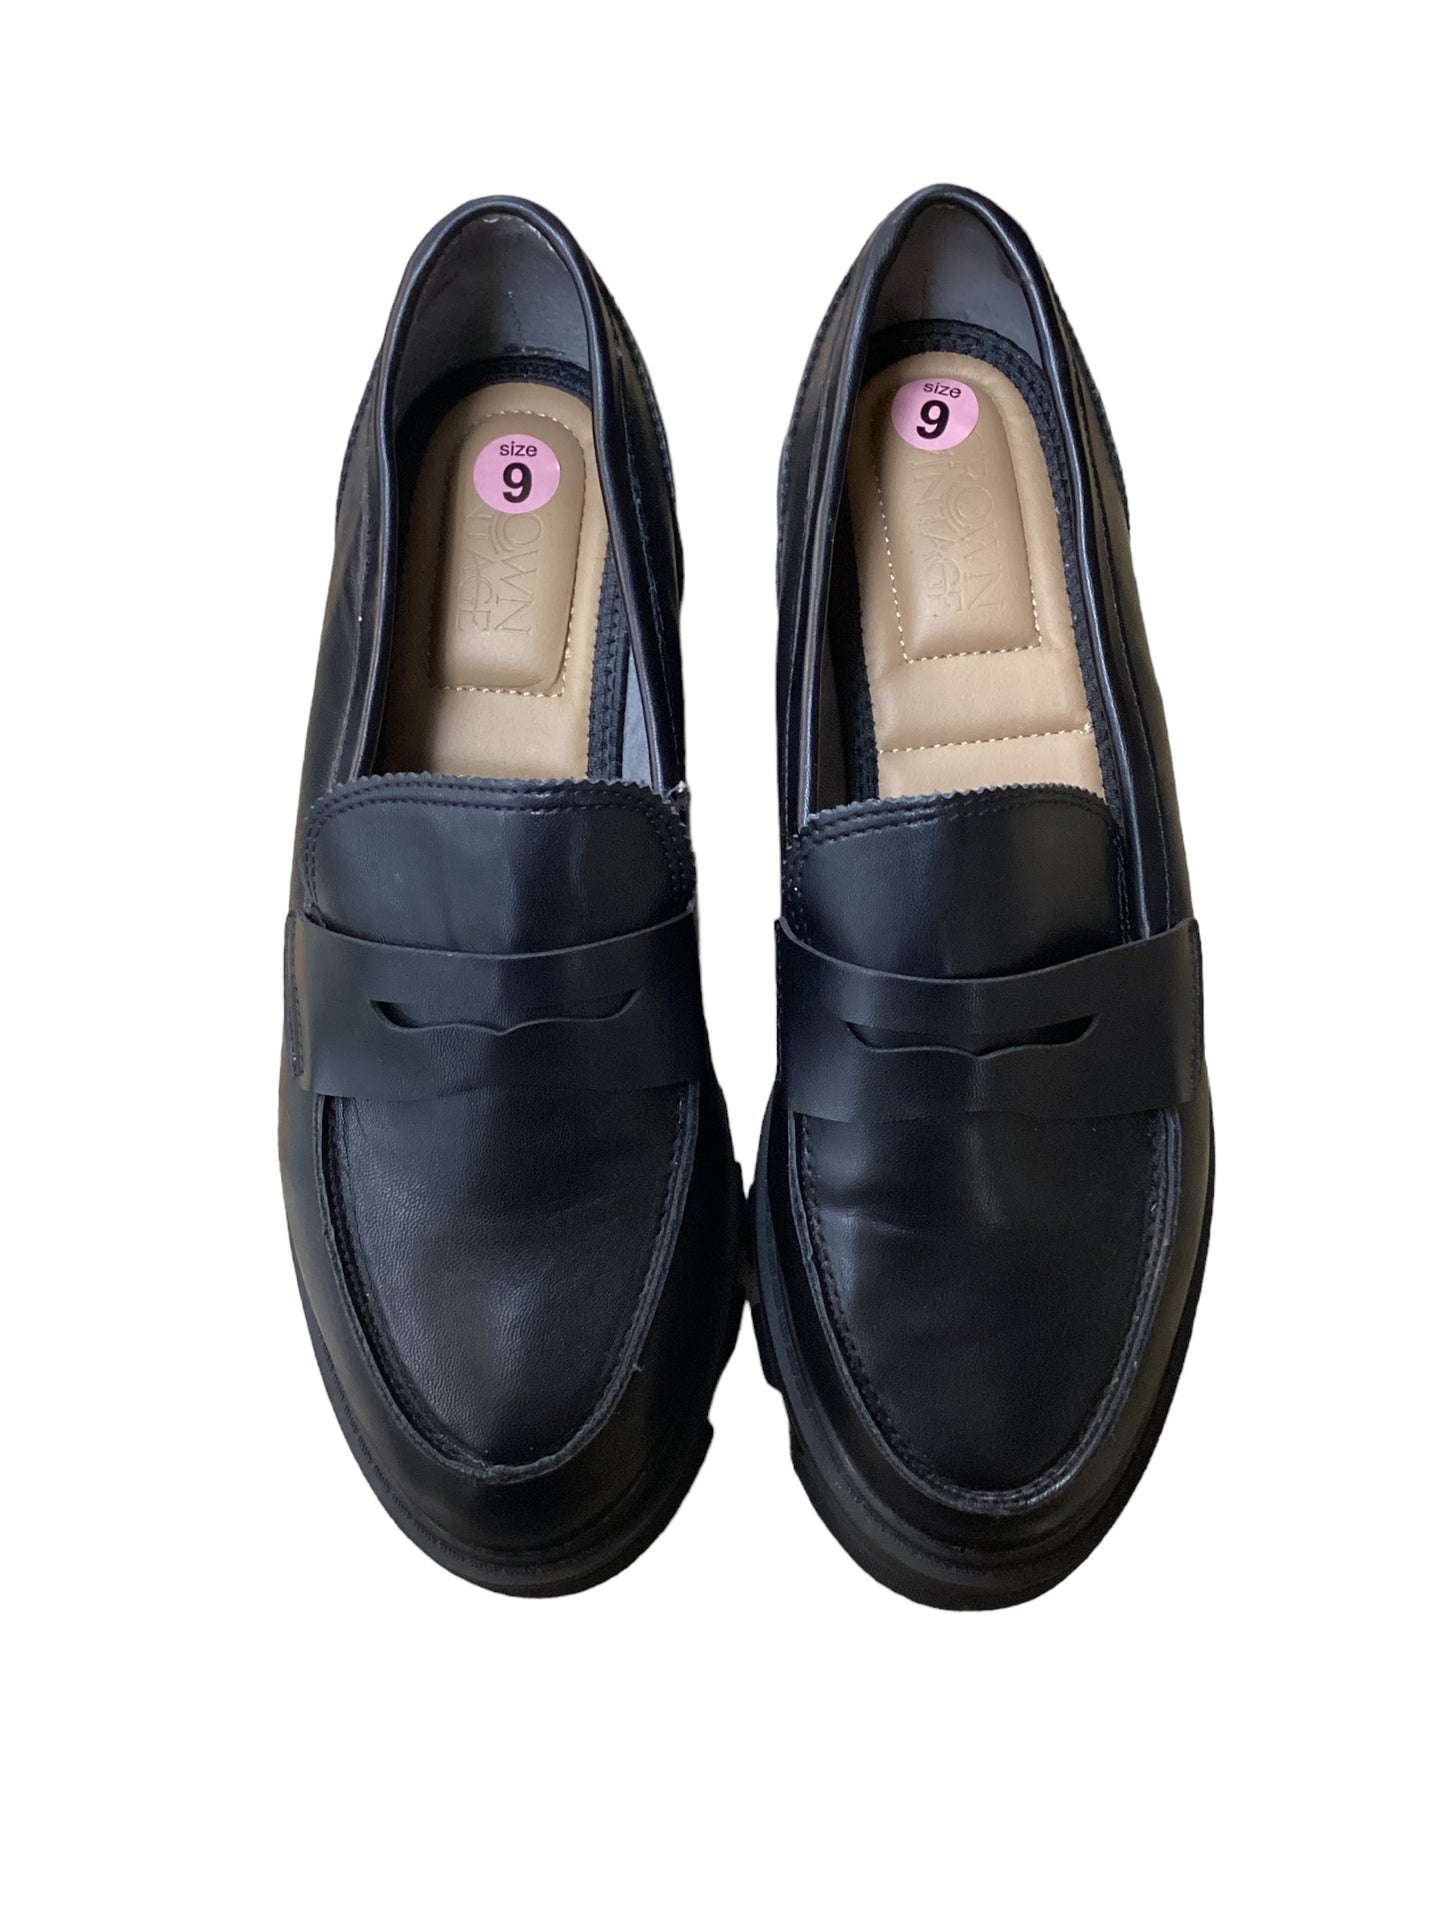 Shoes Flats Loafer Oxford By Crown Vintage  Size: 9